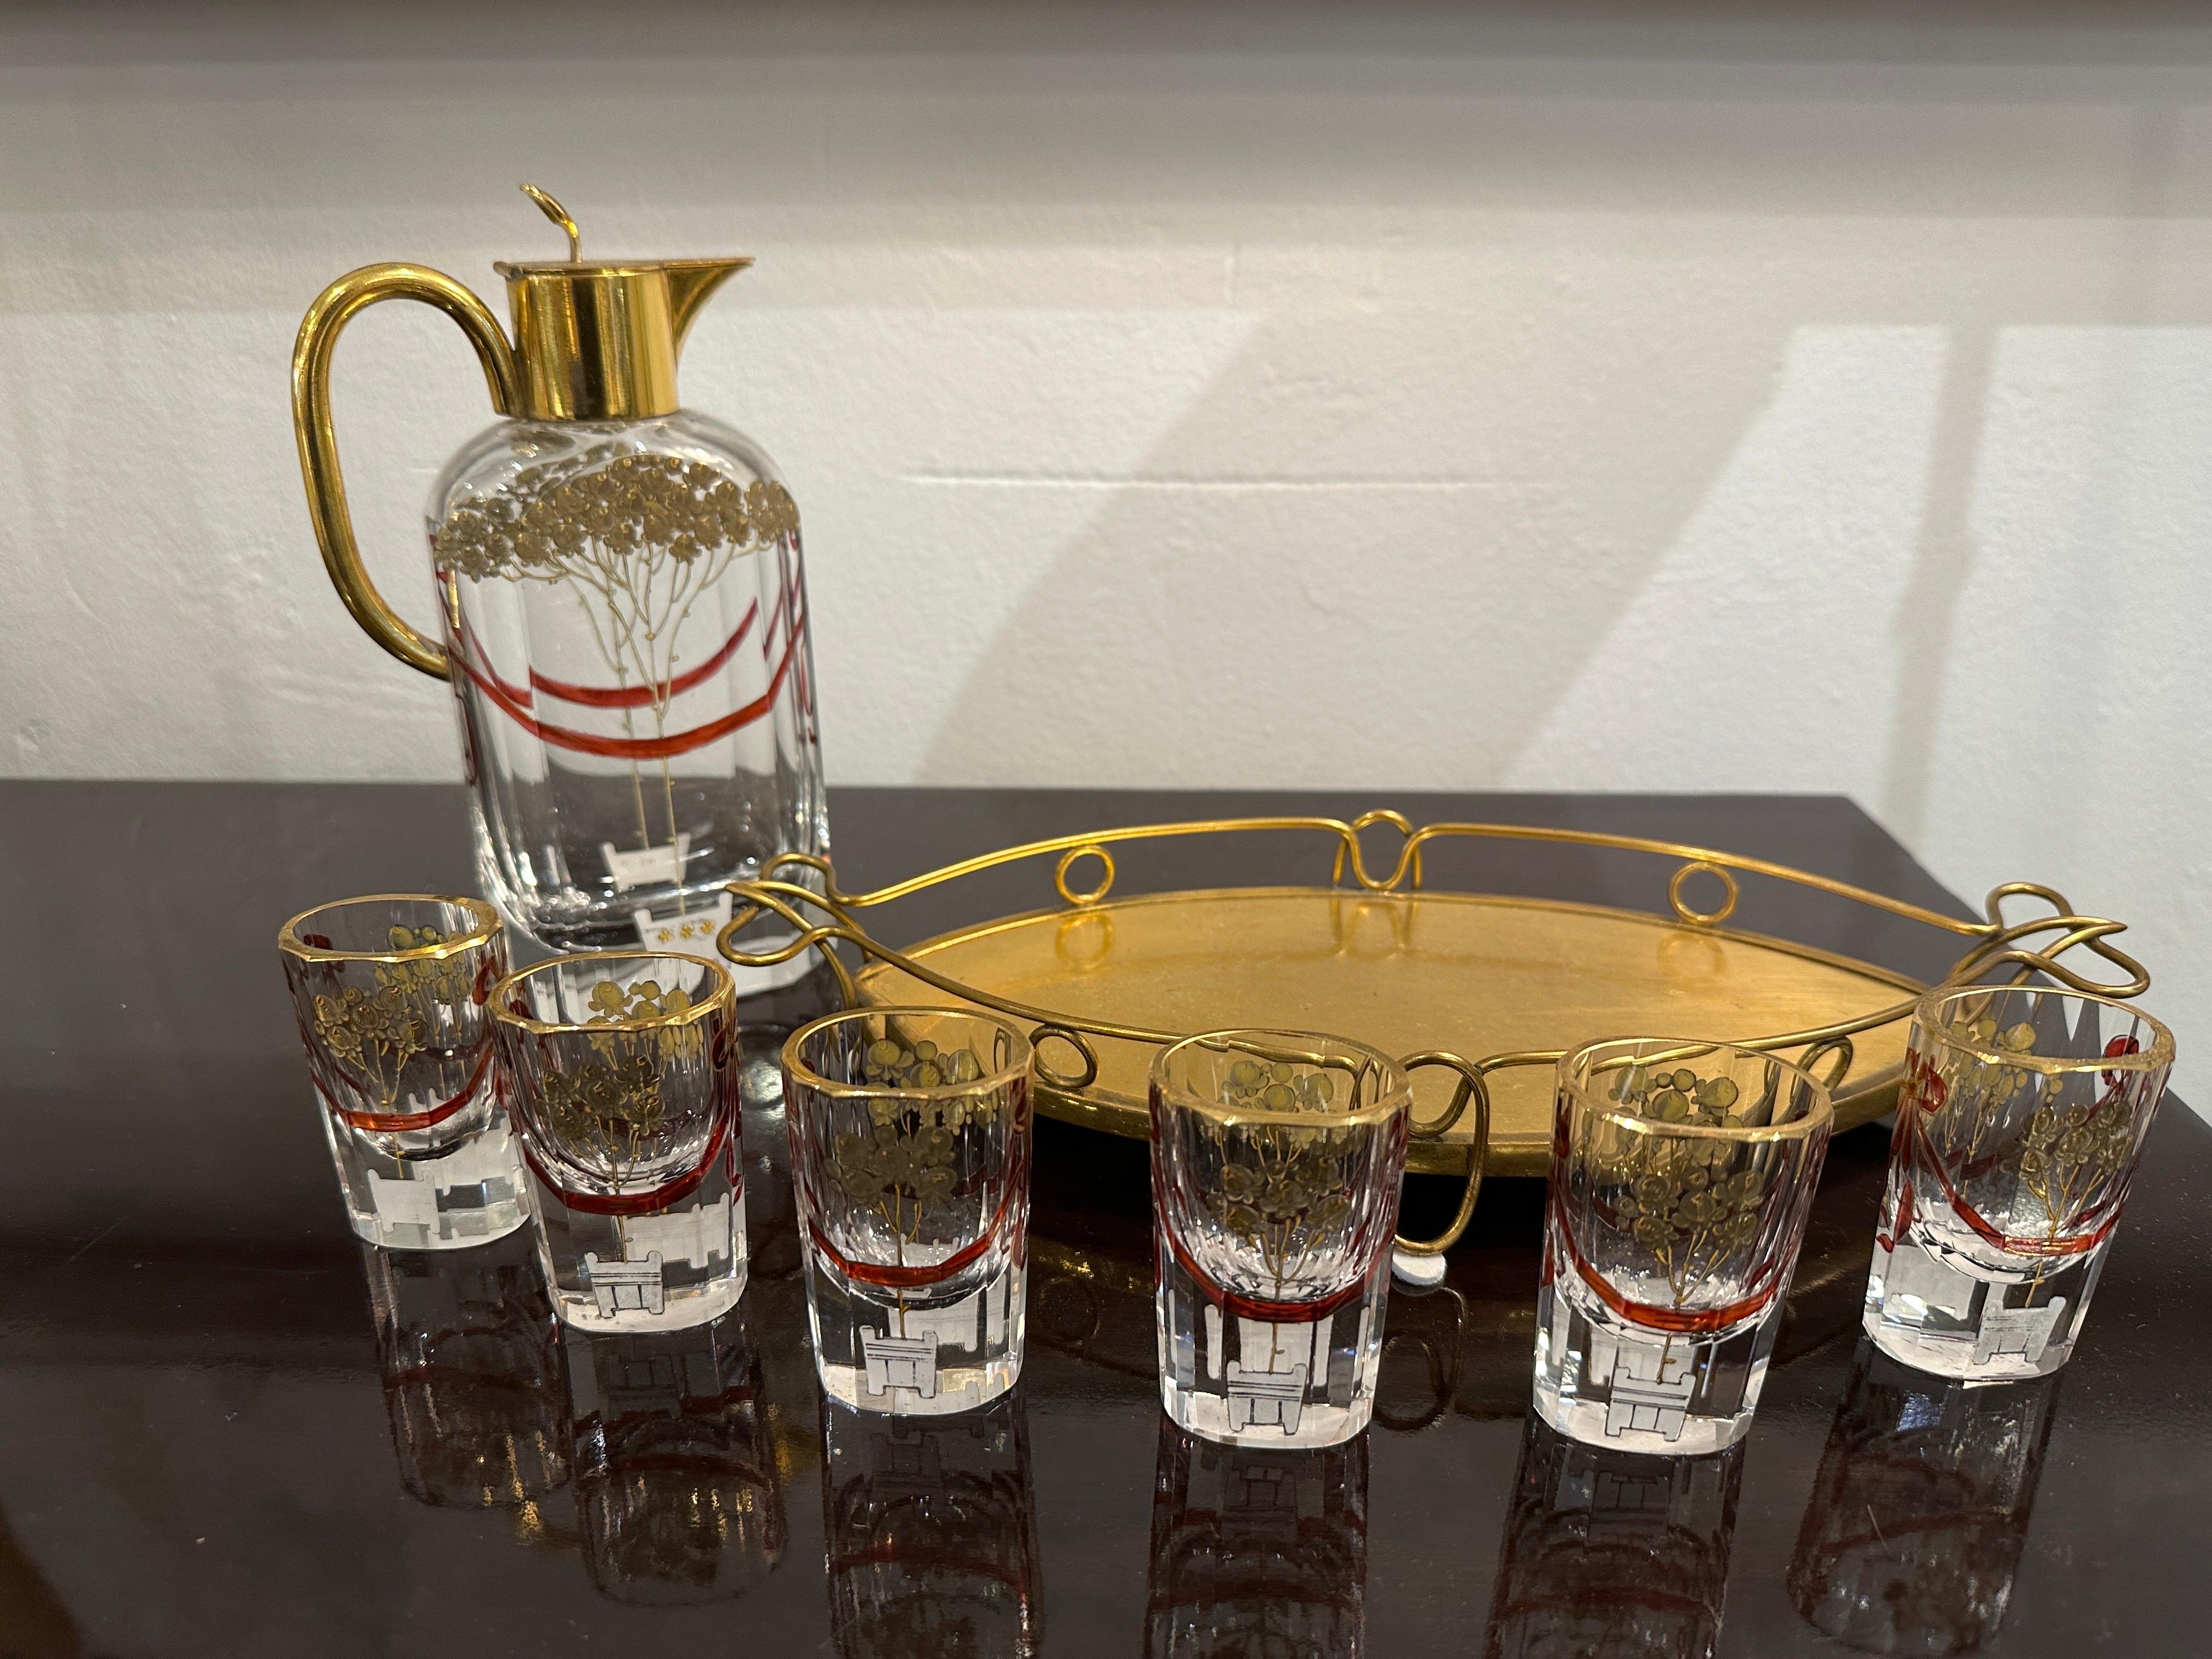 This set of 8 pieces include: decanter, 6 cordial glasses and the tray. Beautifully hand painted on geometric faceted crystal glassware, the designs feature red ribbons and gold florals topiaries. Amazing period set in nearly un-used condition. Each